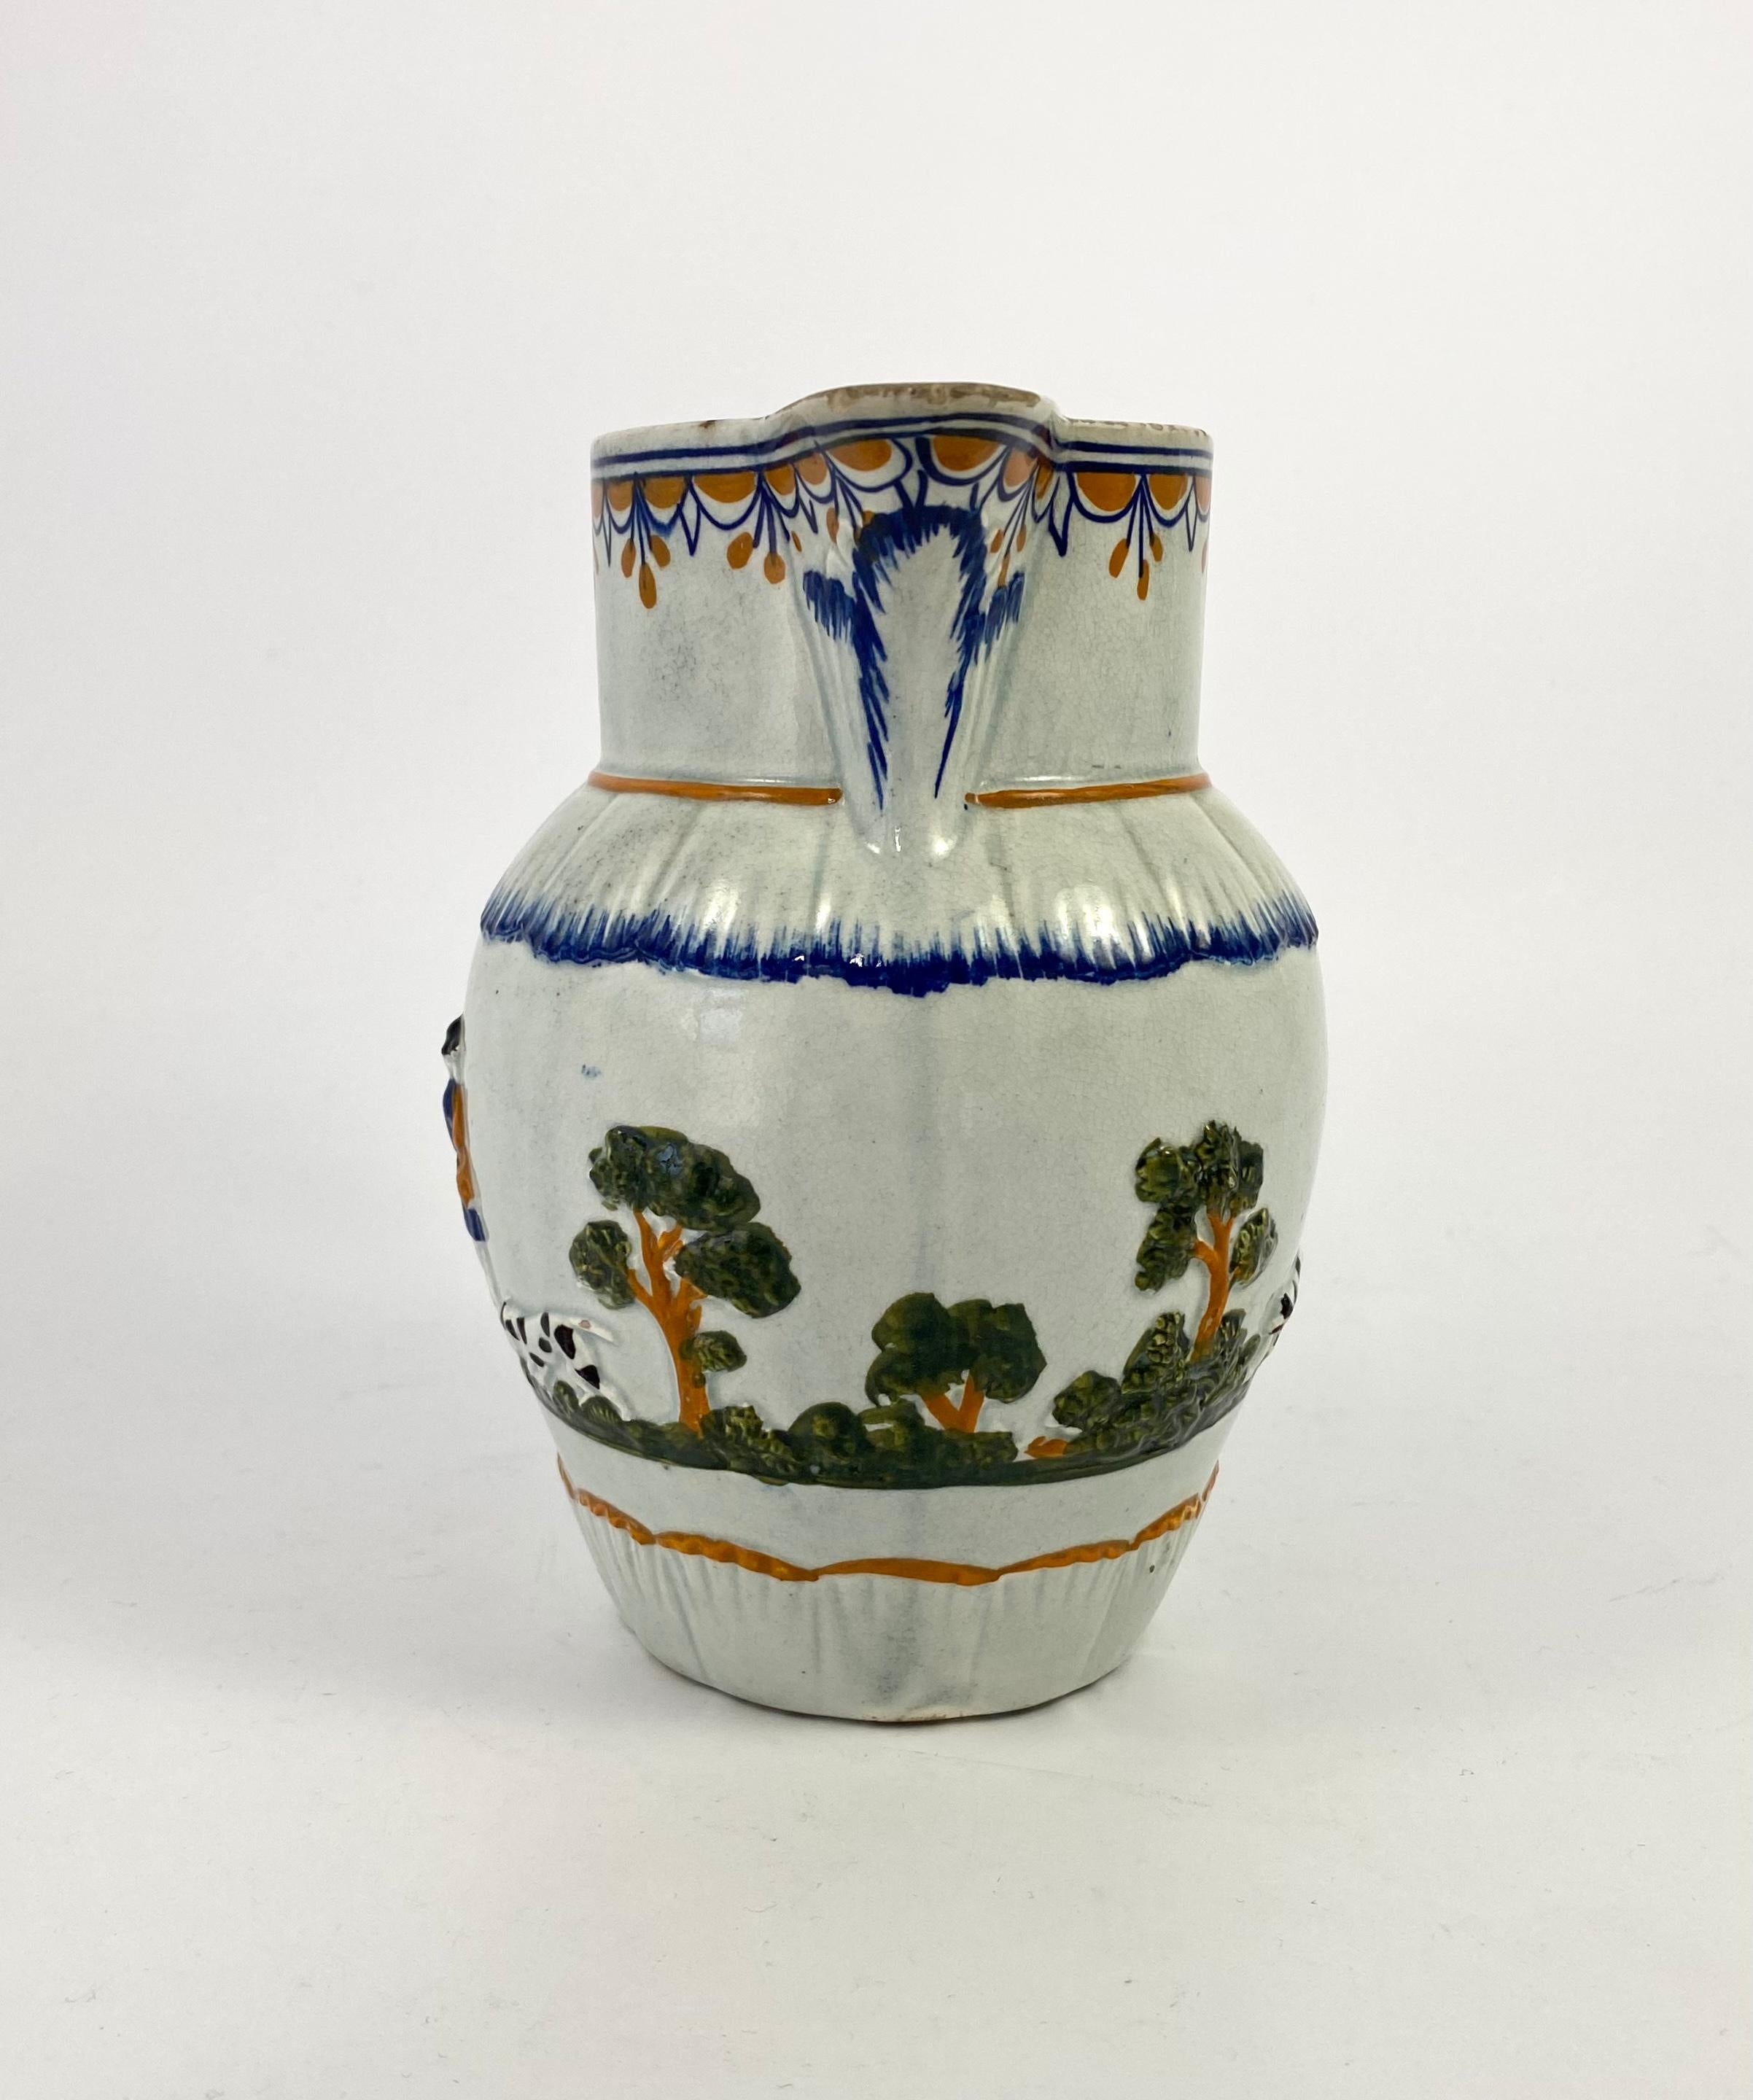 Prattware pottery Hunting jug, c. 1810. The finely potted jug, moulded with a continuous scene of huntsman, with spotted hounds, walking amongst trees, coloured in Pratt glazes. Having a dolphin moulded handle, and acanthus moulded spout, with a